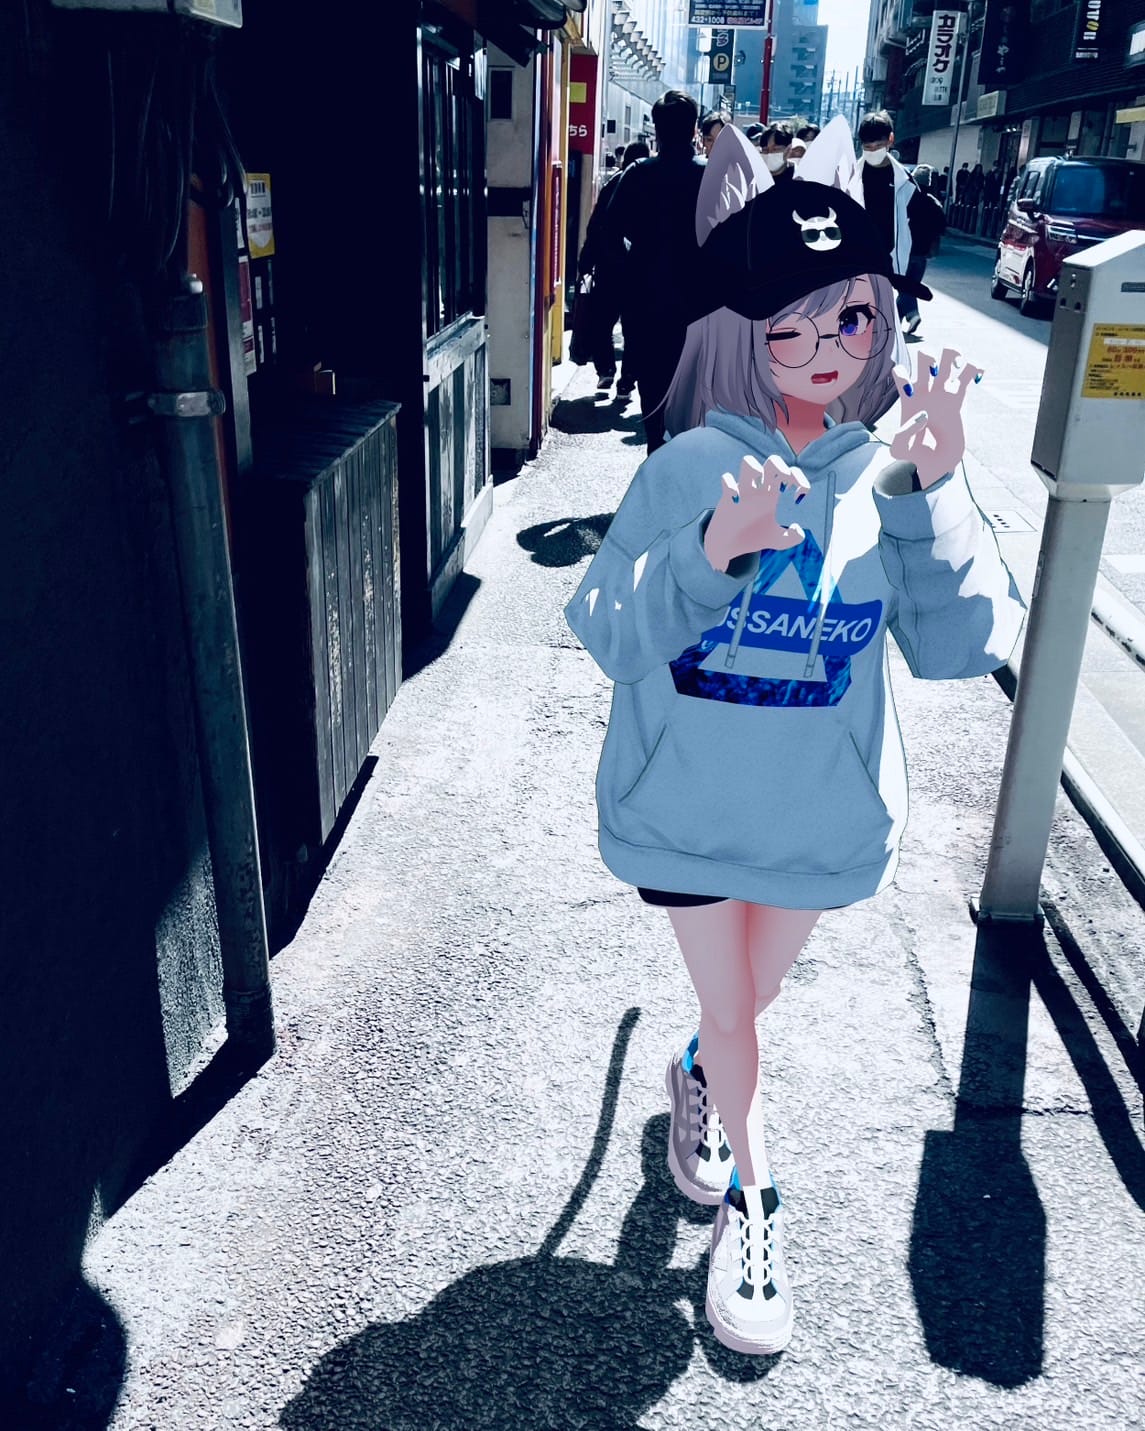 A mixed-reality photo of a virtual avatar (fair skin, white hair, sweatshirt, and sneakers) walking down a physical street of modern-day Japan.